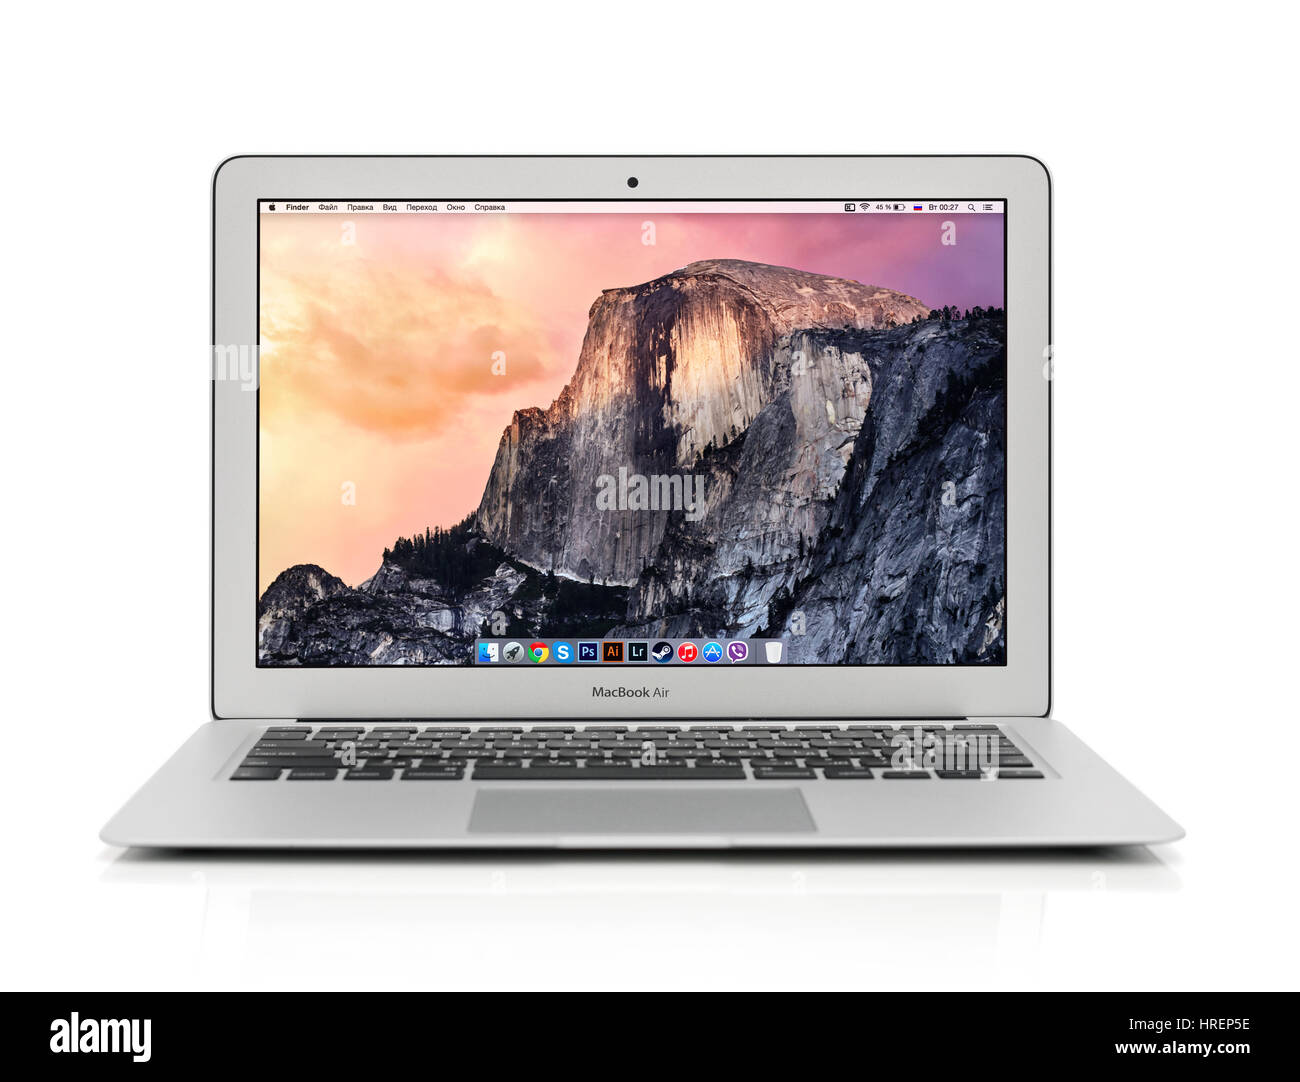 KIEV, UKRAINE - JANUARY 29, 2015: Studio shot of brand new Apple MacBook Air Early 2014 with home page on screen, designed and developed by Apple Inc. Stock Photo